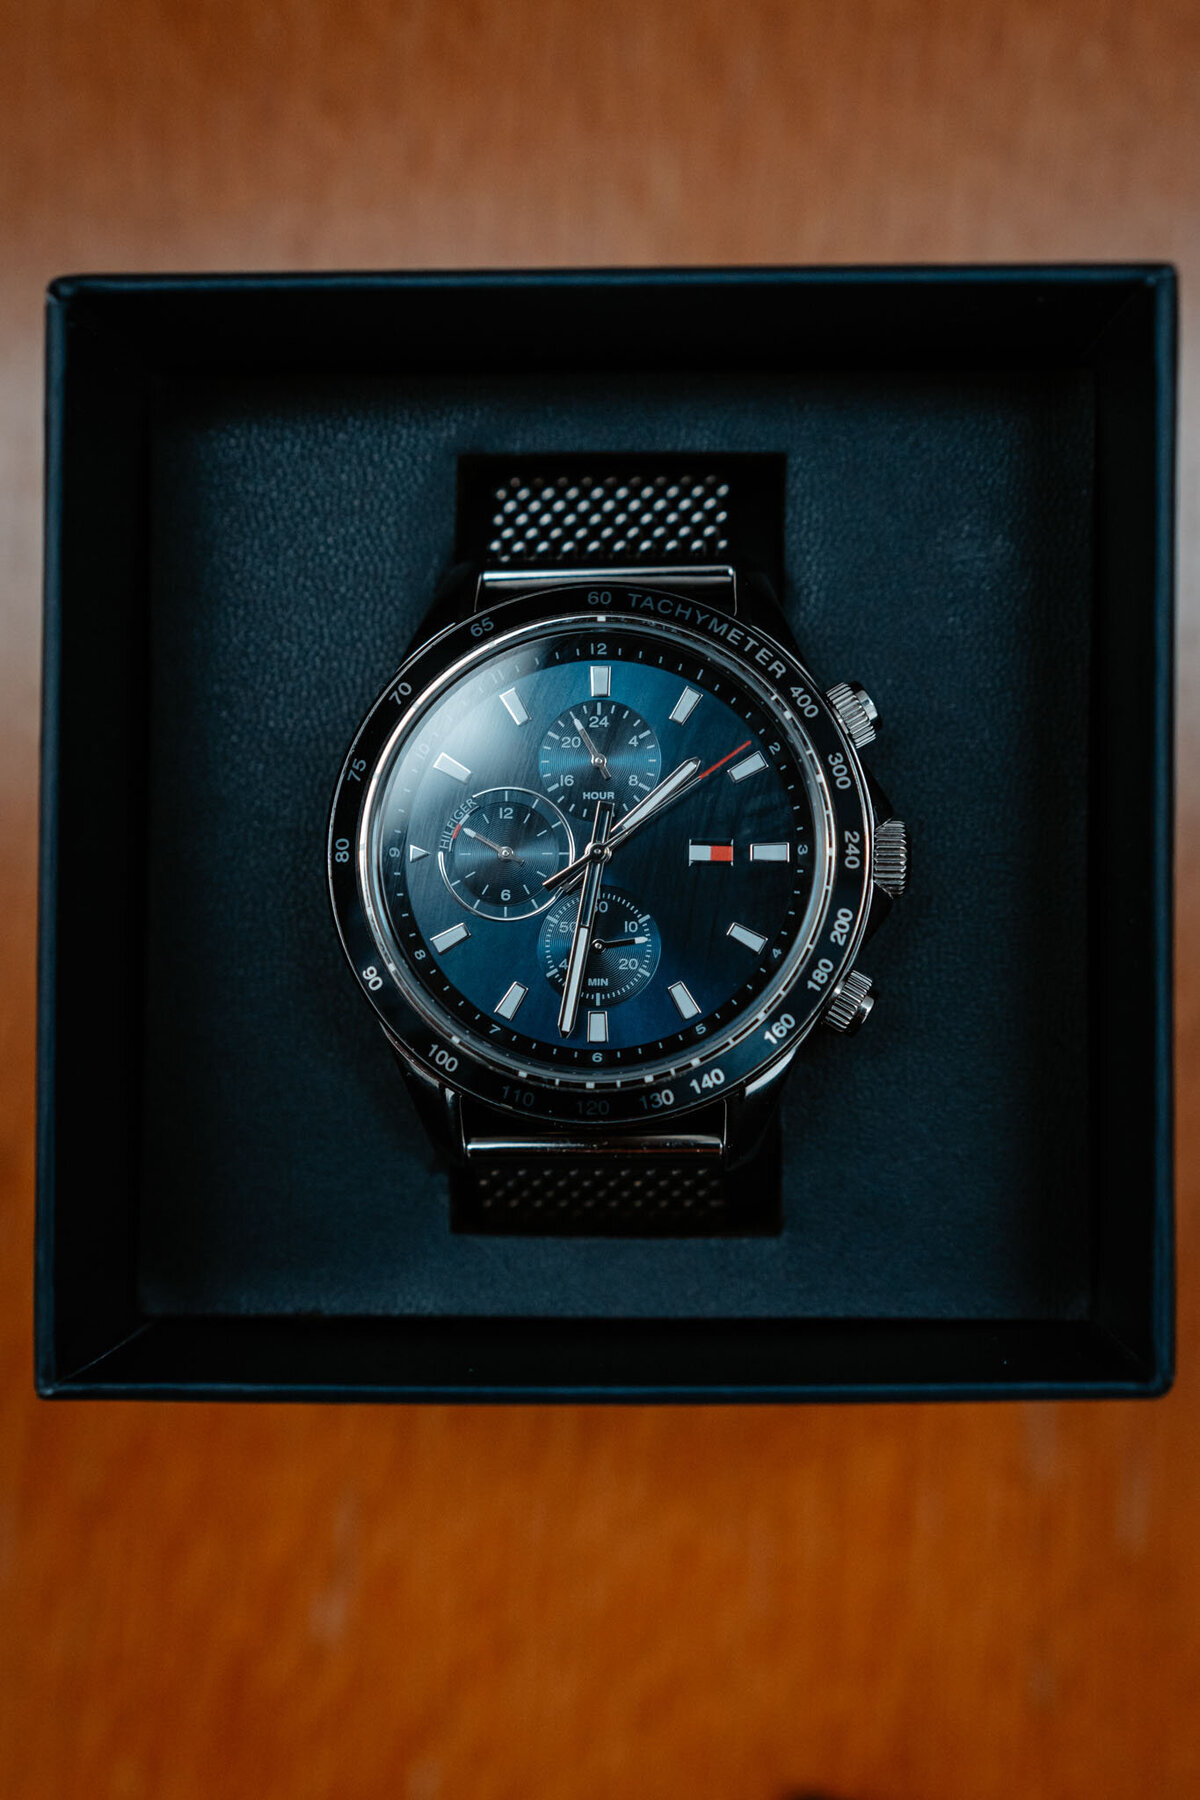 Ben's gorgeous watch that he'll wear for his wedding ceremony